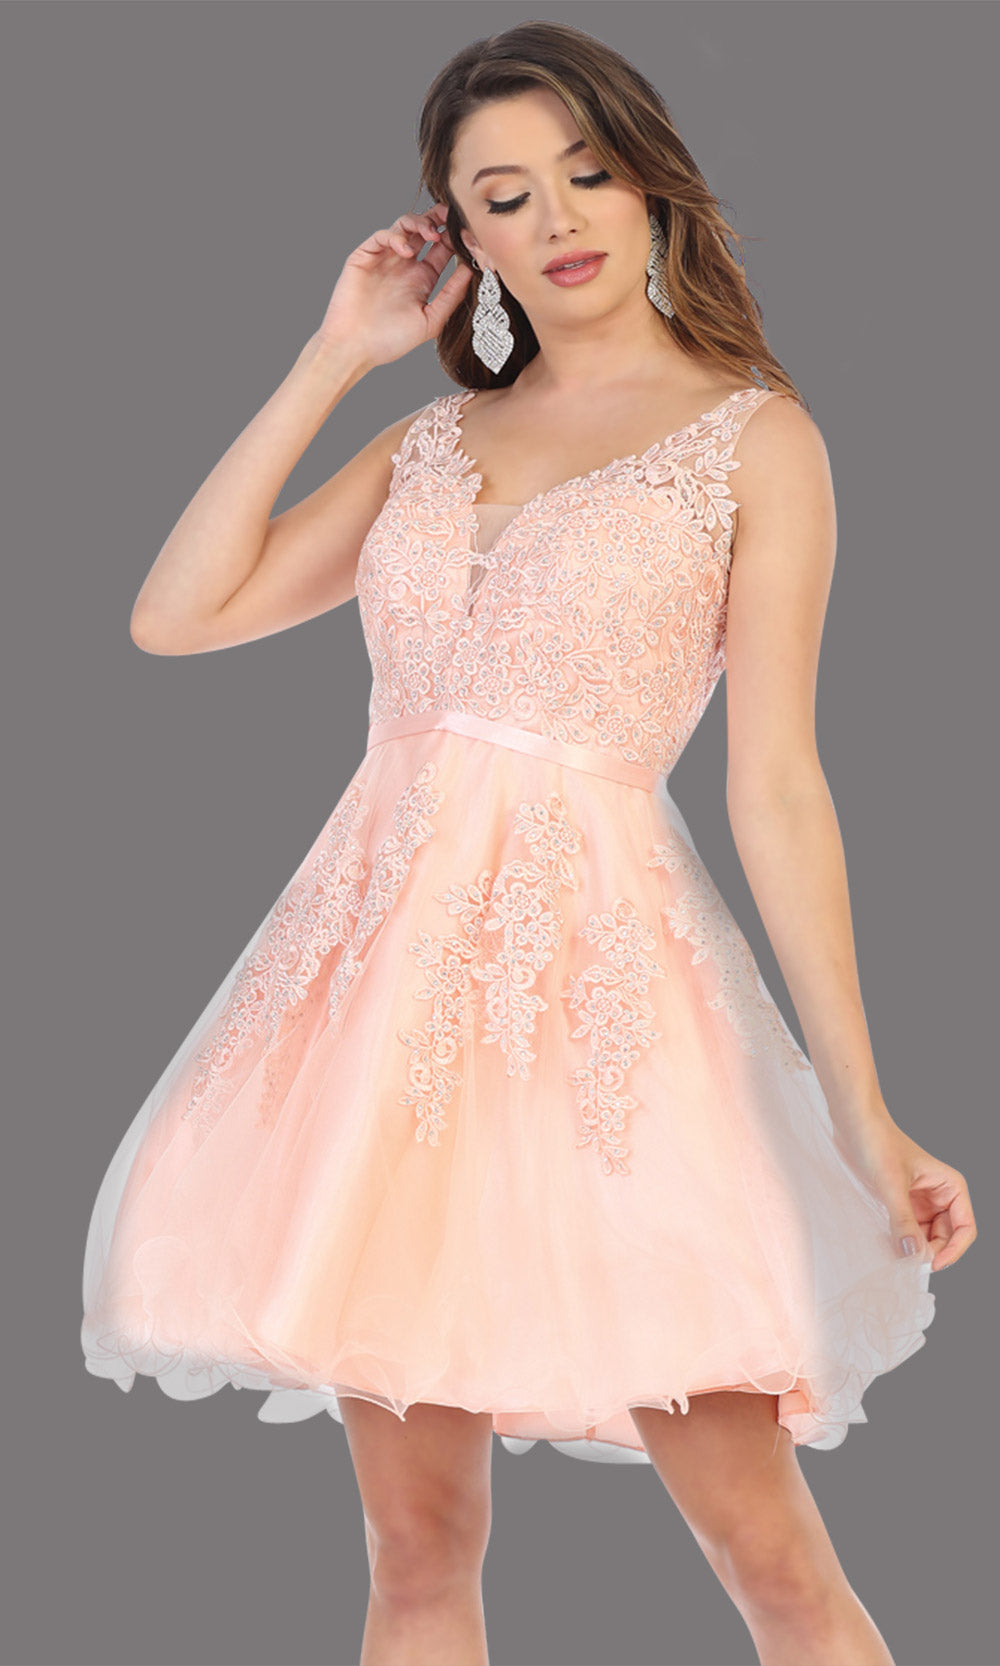 Mayqueen Mq1692 short blush pink flowy v neck simple lace grade 8 graduation dress w/ wide straps. This blush pink party dress is perfect for prom, graduation, grade 8 grad, confirmation dress, bat mitzvah dress, damas. Plus sizes avail.jpggrade 8 grad dresses, graduation dresses